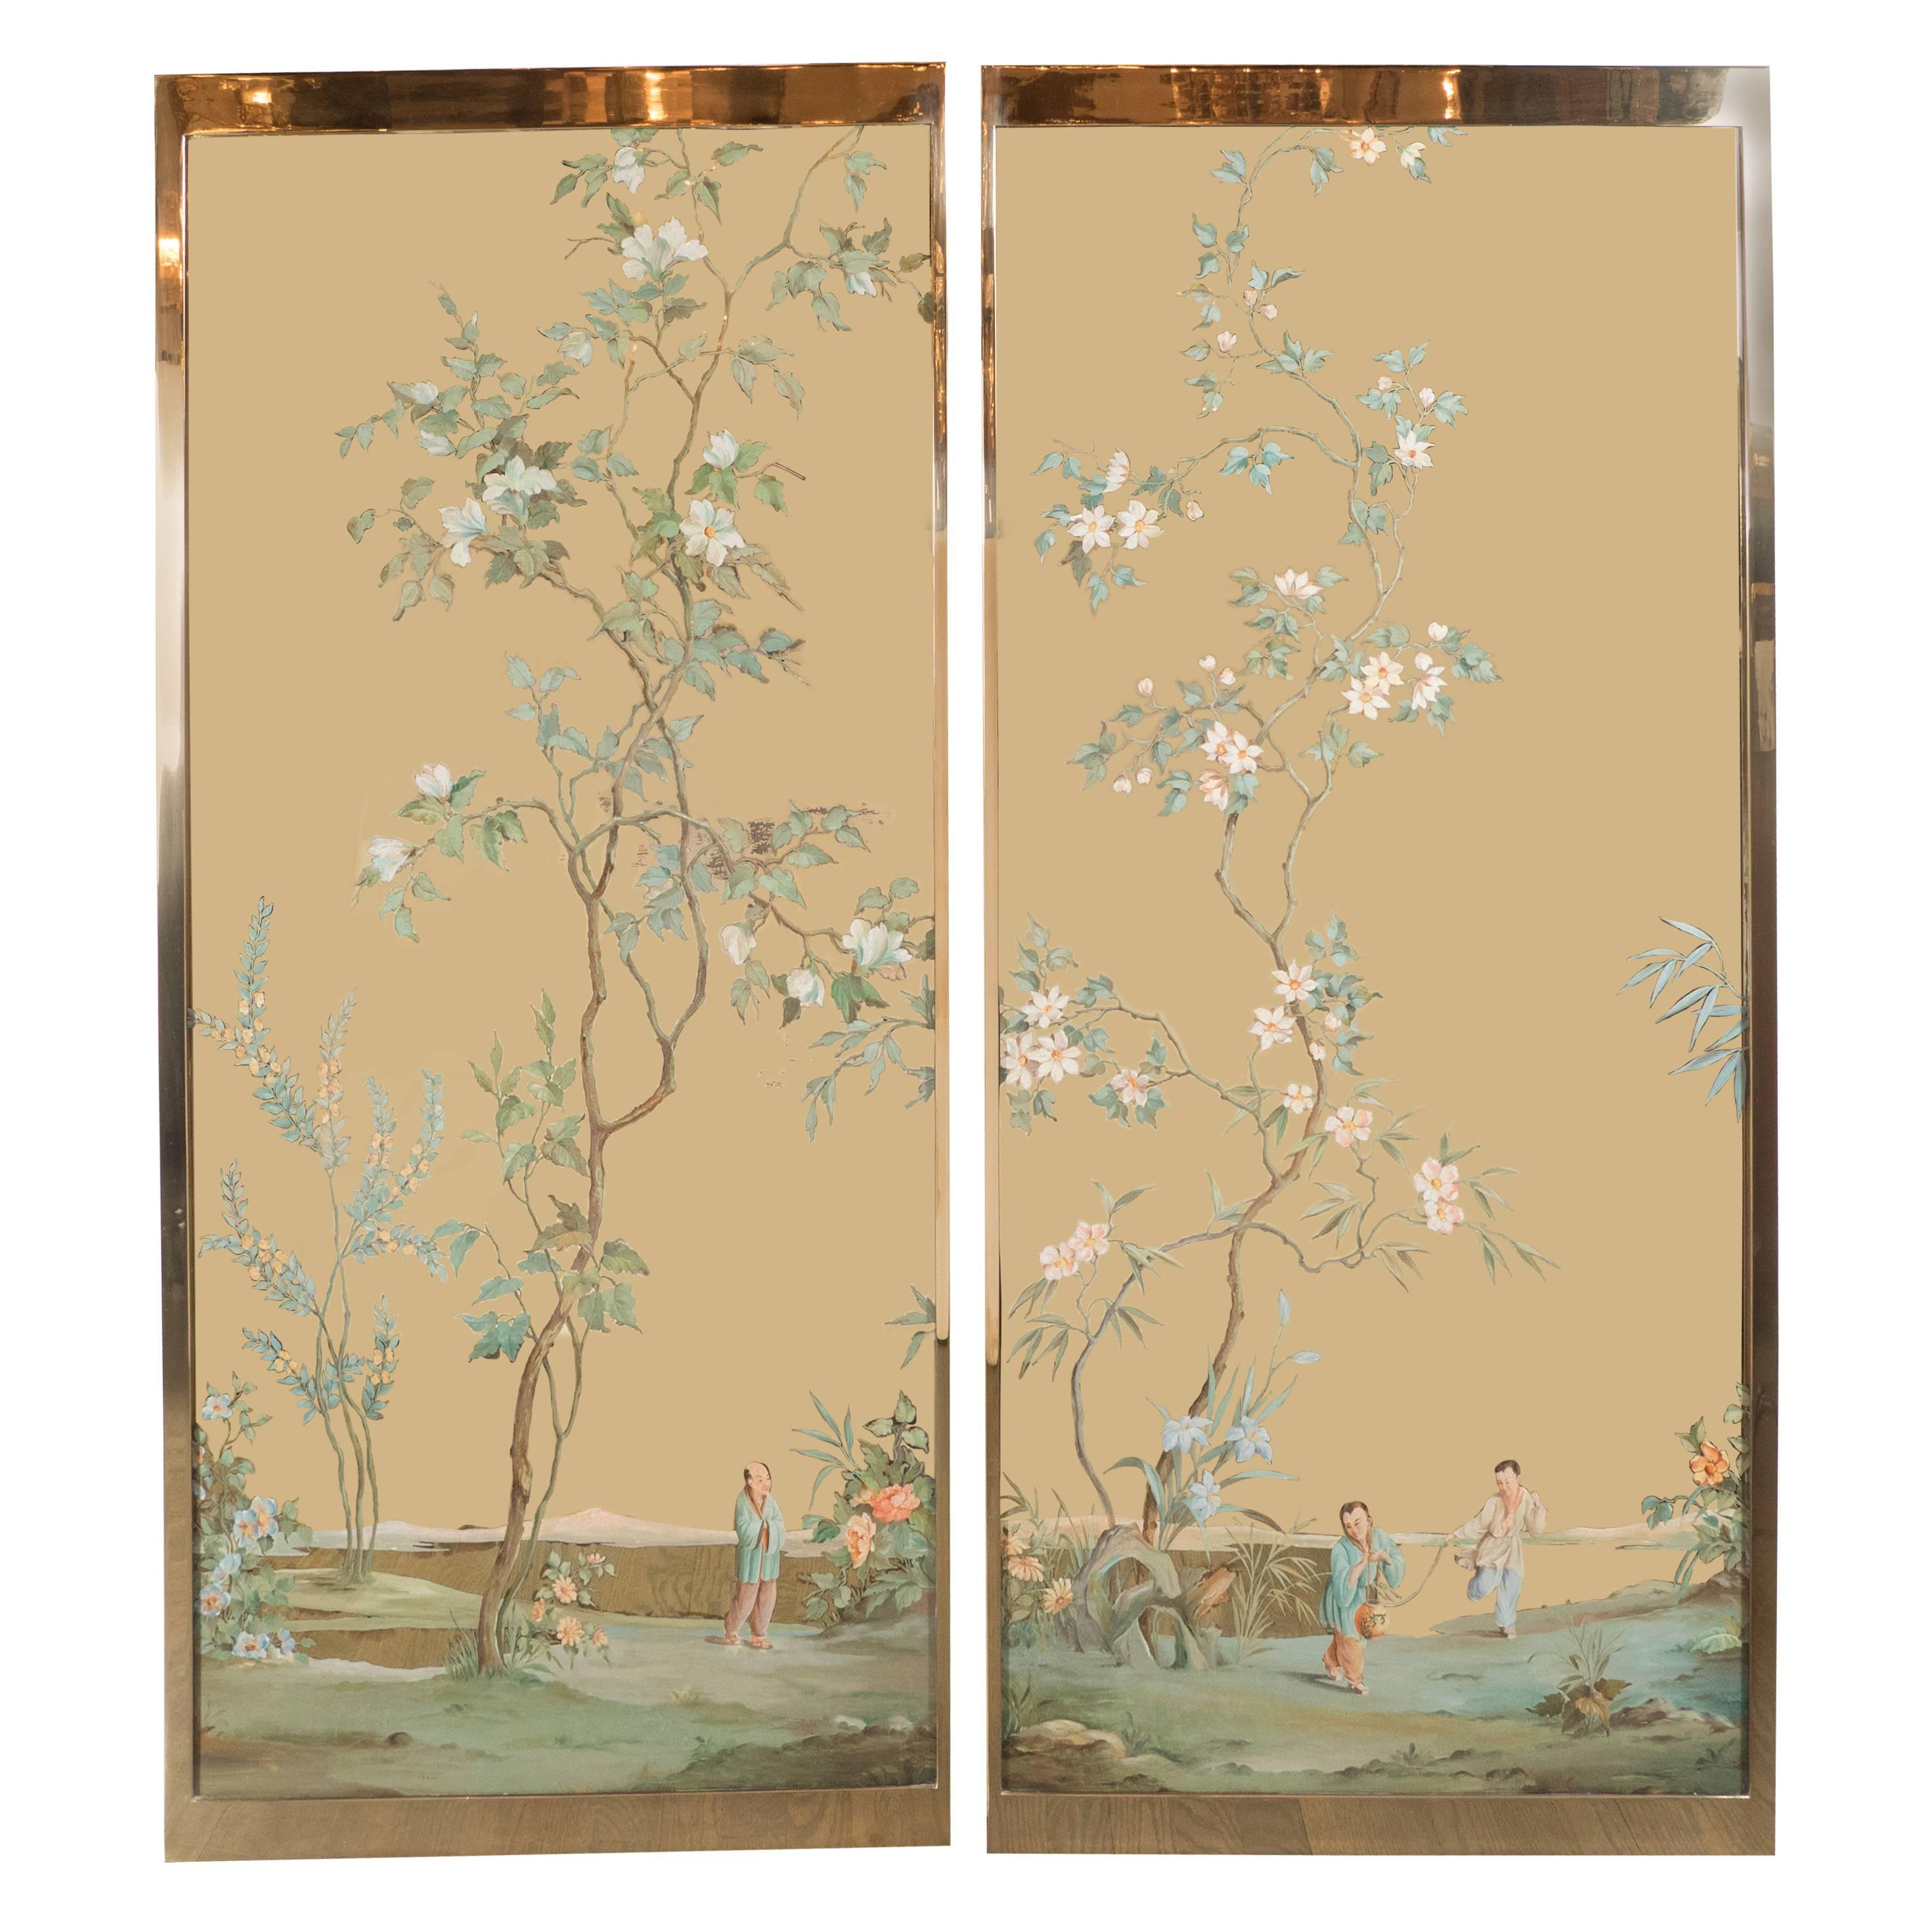 Gorgeous Pair of Mid-Century Chinoiserie Mirrors with Polished Brass Frame